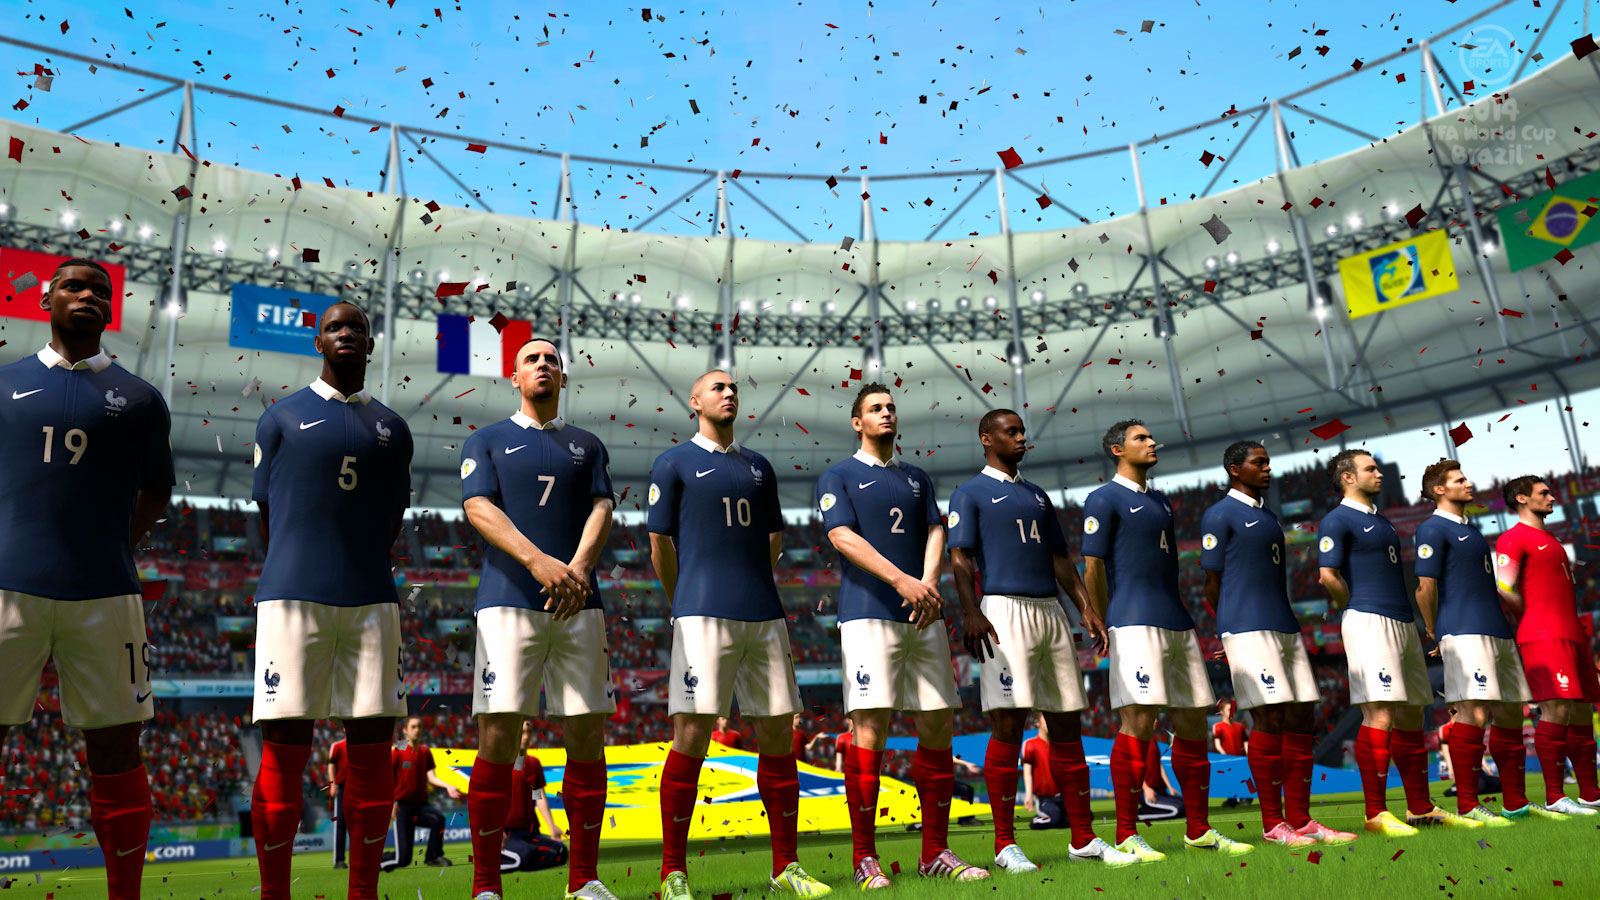 Xbox One, PS4, and PC getting World Cup game, devs explain why [UPDATE] - GameSpot